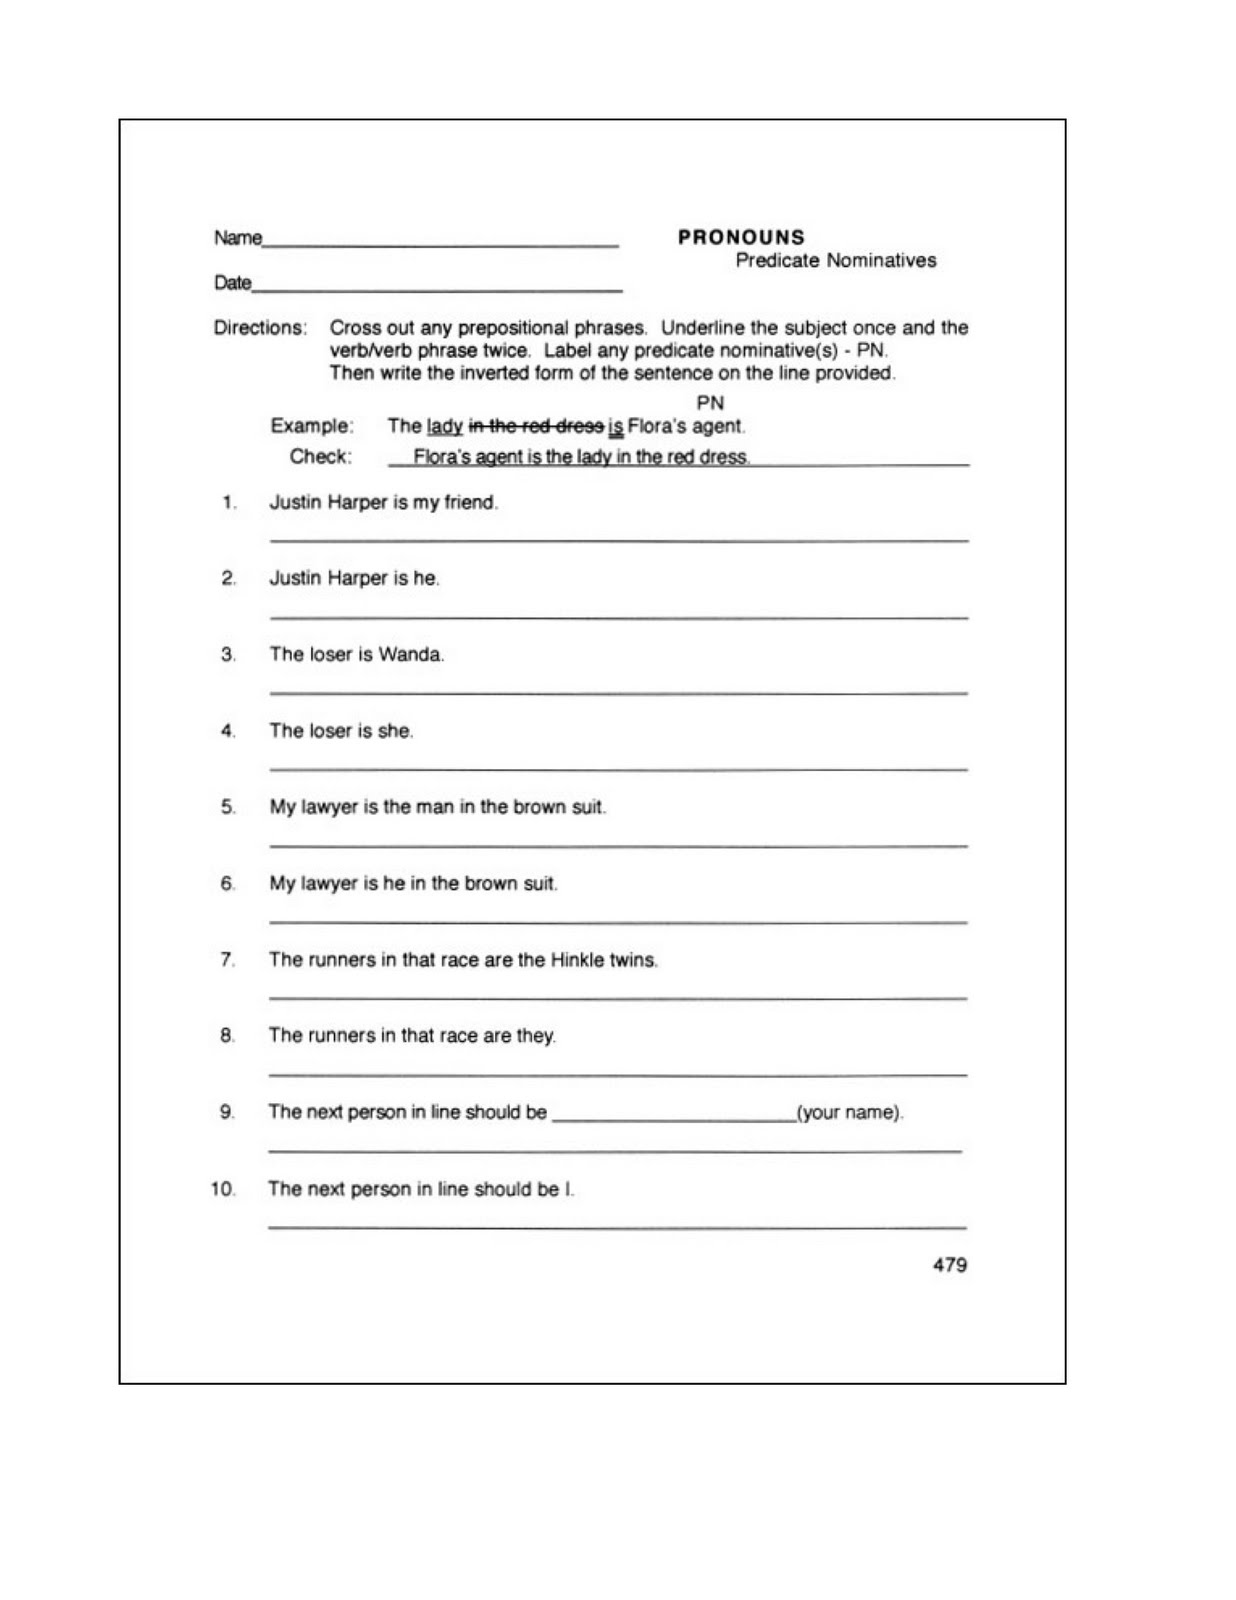 cool-reading-comprehension-worksheets-10th-grade-gallery-rugby-rumilly